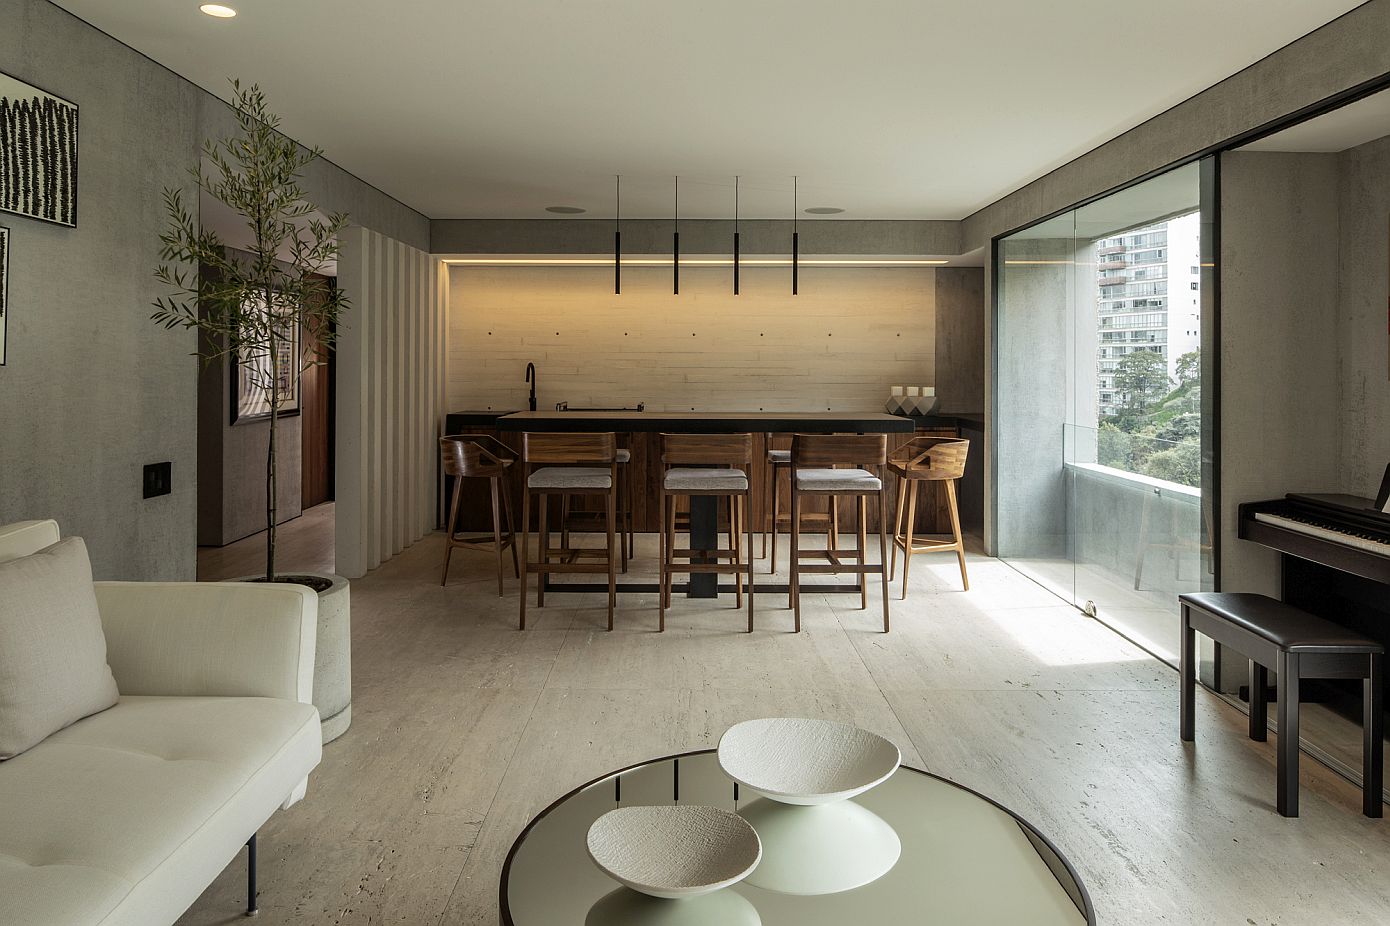 Apartment T 801 by Acunsa Arquitectos